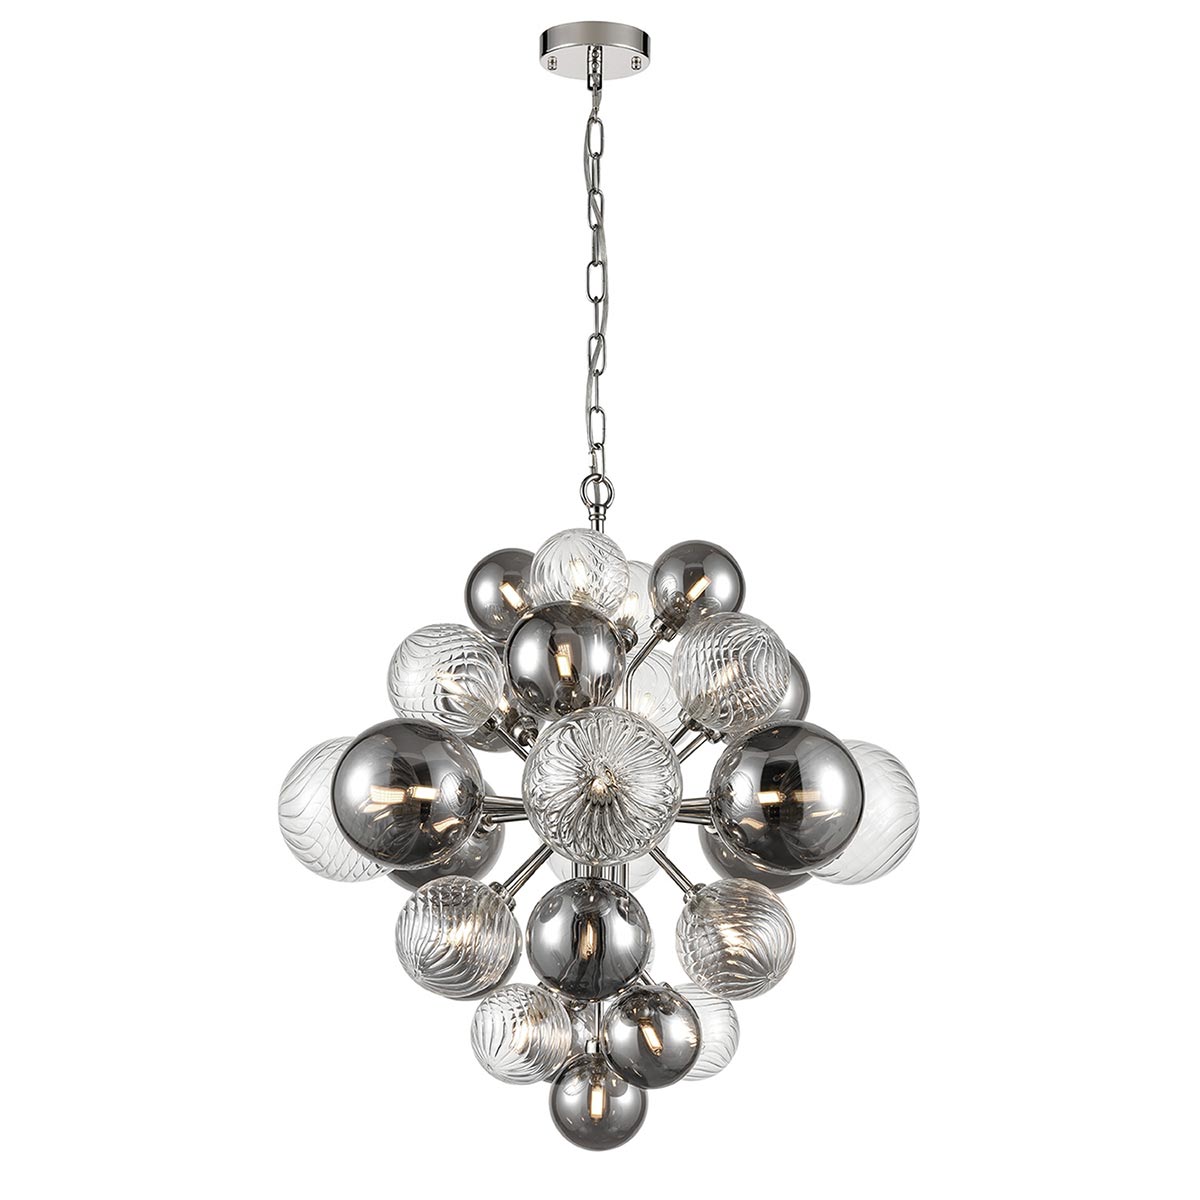 Modern 29 Light Chrome Chandelier With Smoked & Clear Glass Globes